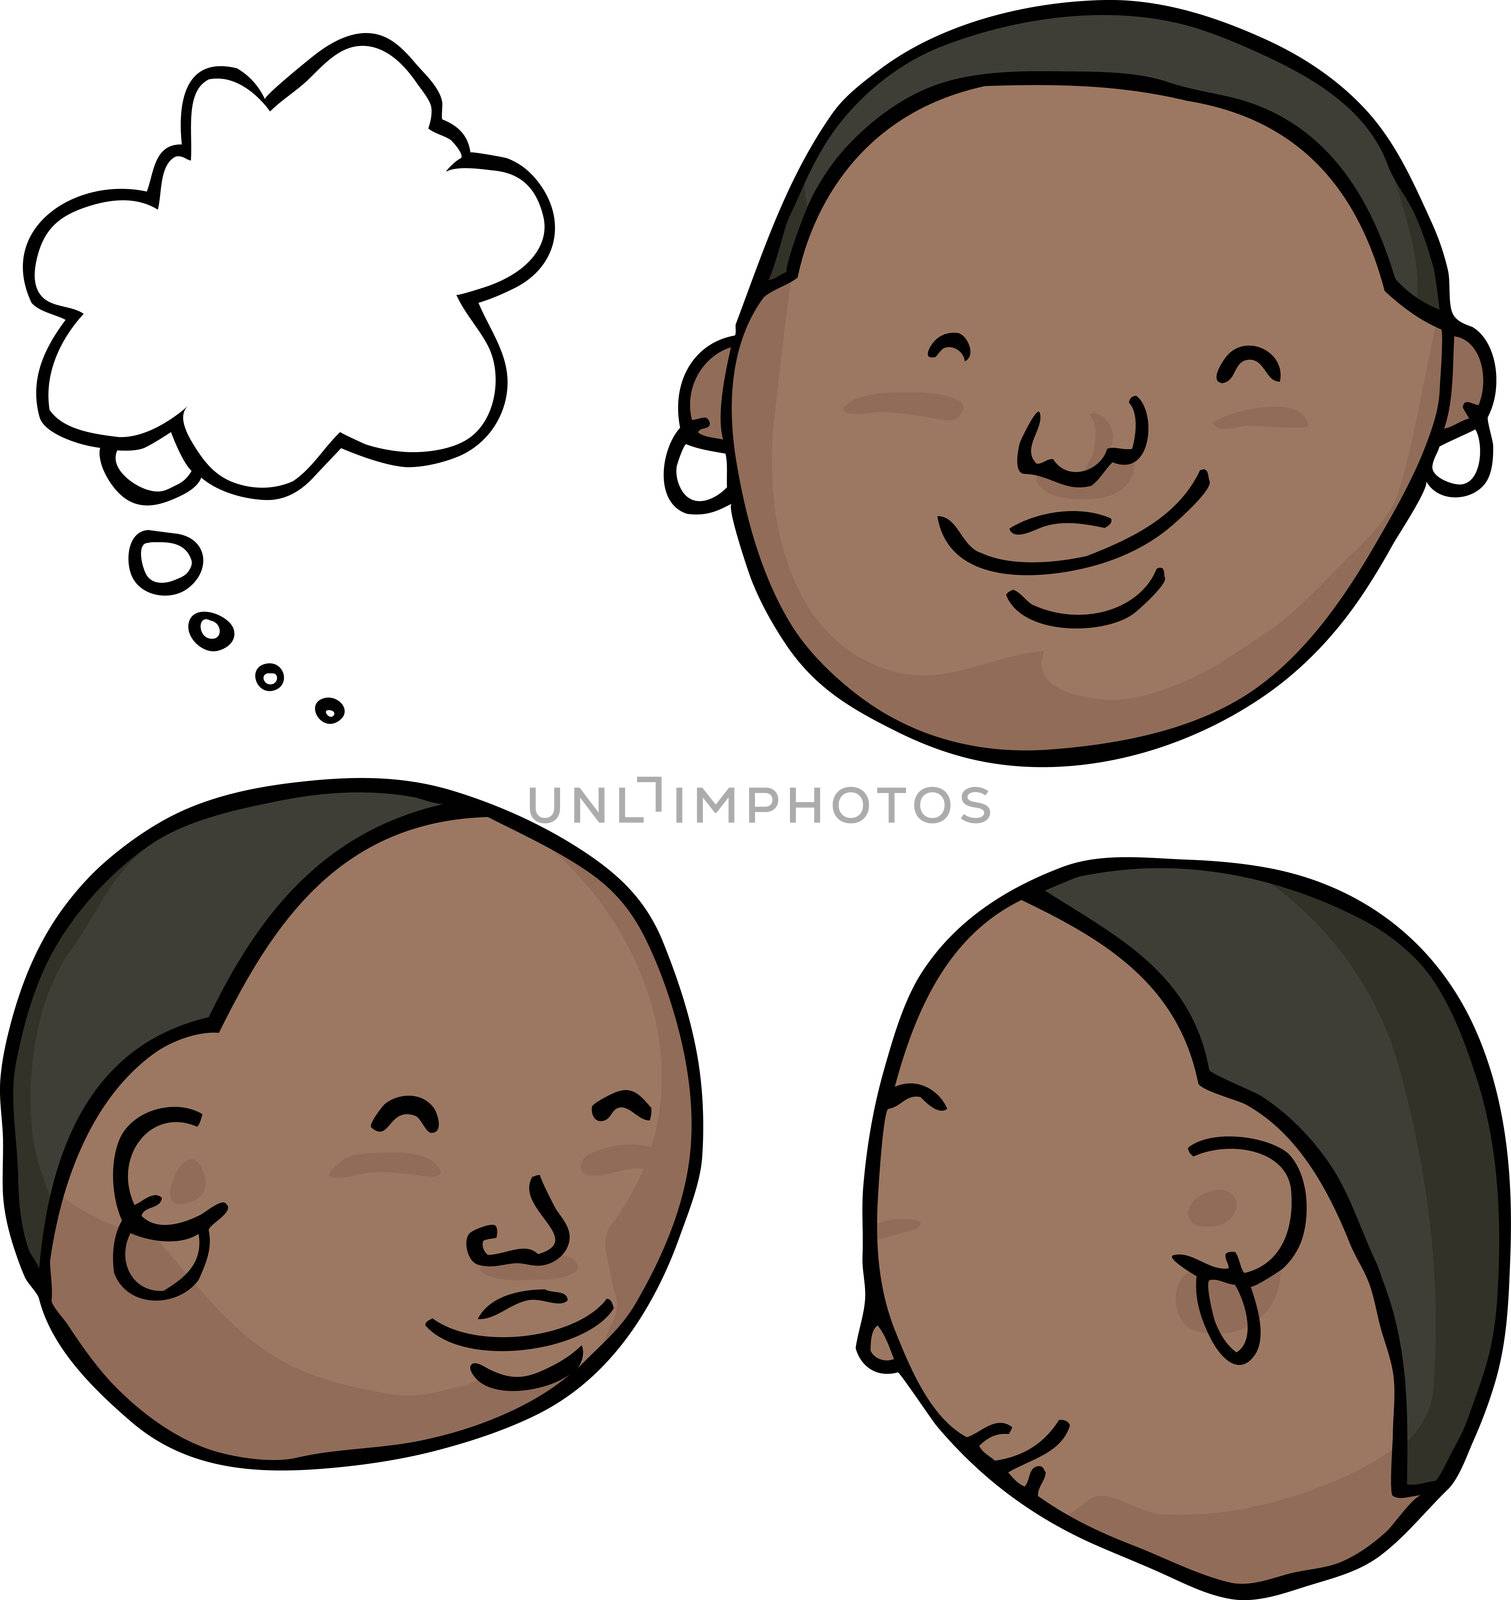 Cute African smiley face icons with thought bubble